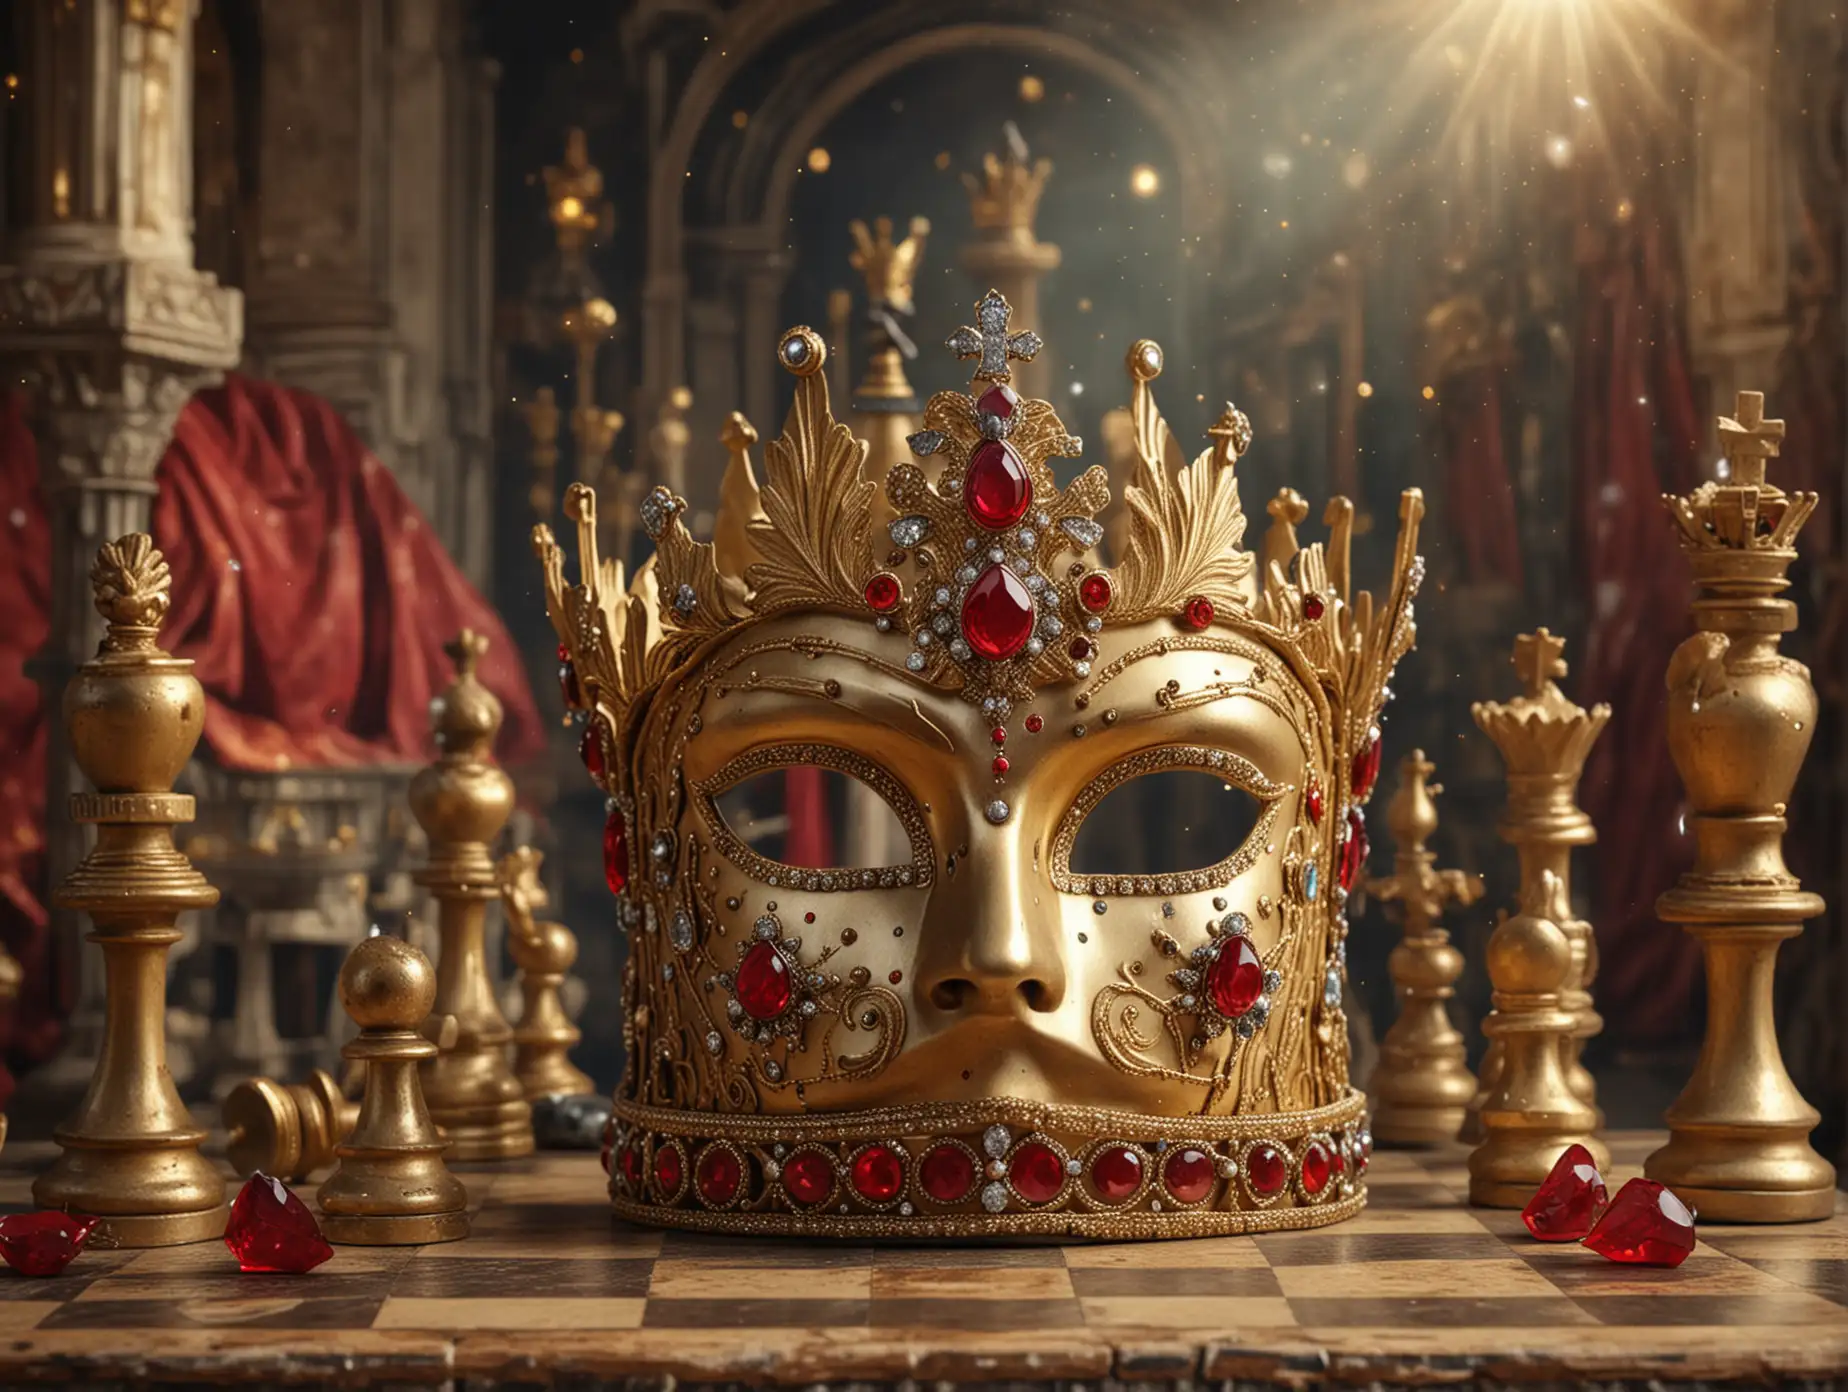 Regal-Crown-with-Jewels-and-Venetian-Mask-Amidst-Golden-Chess-Pieces-in-Magical-Castle-Scene